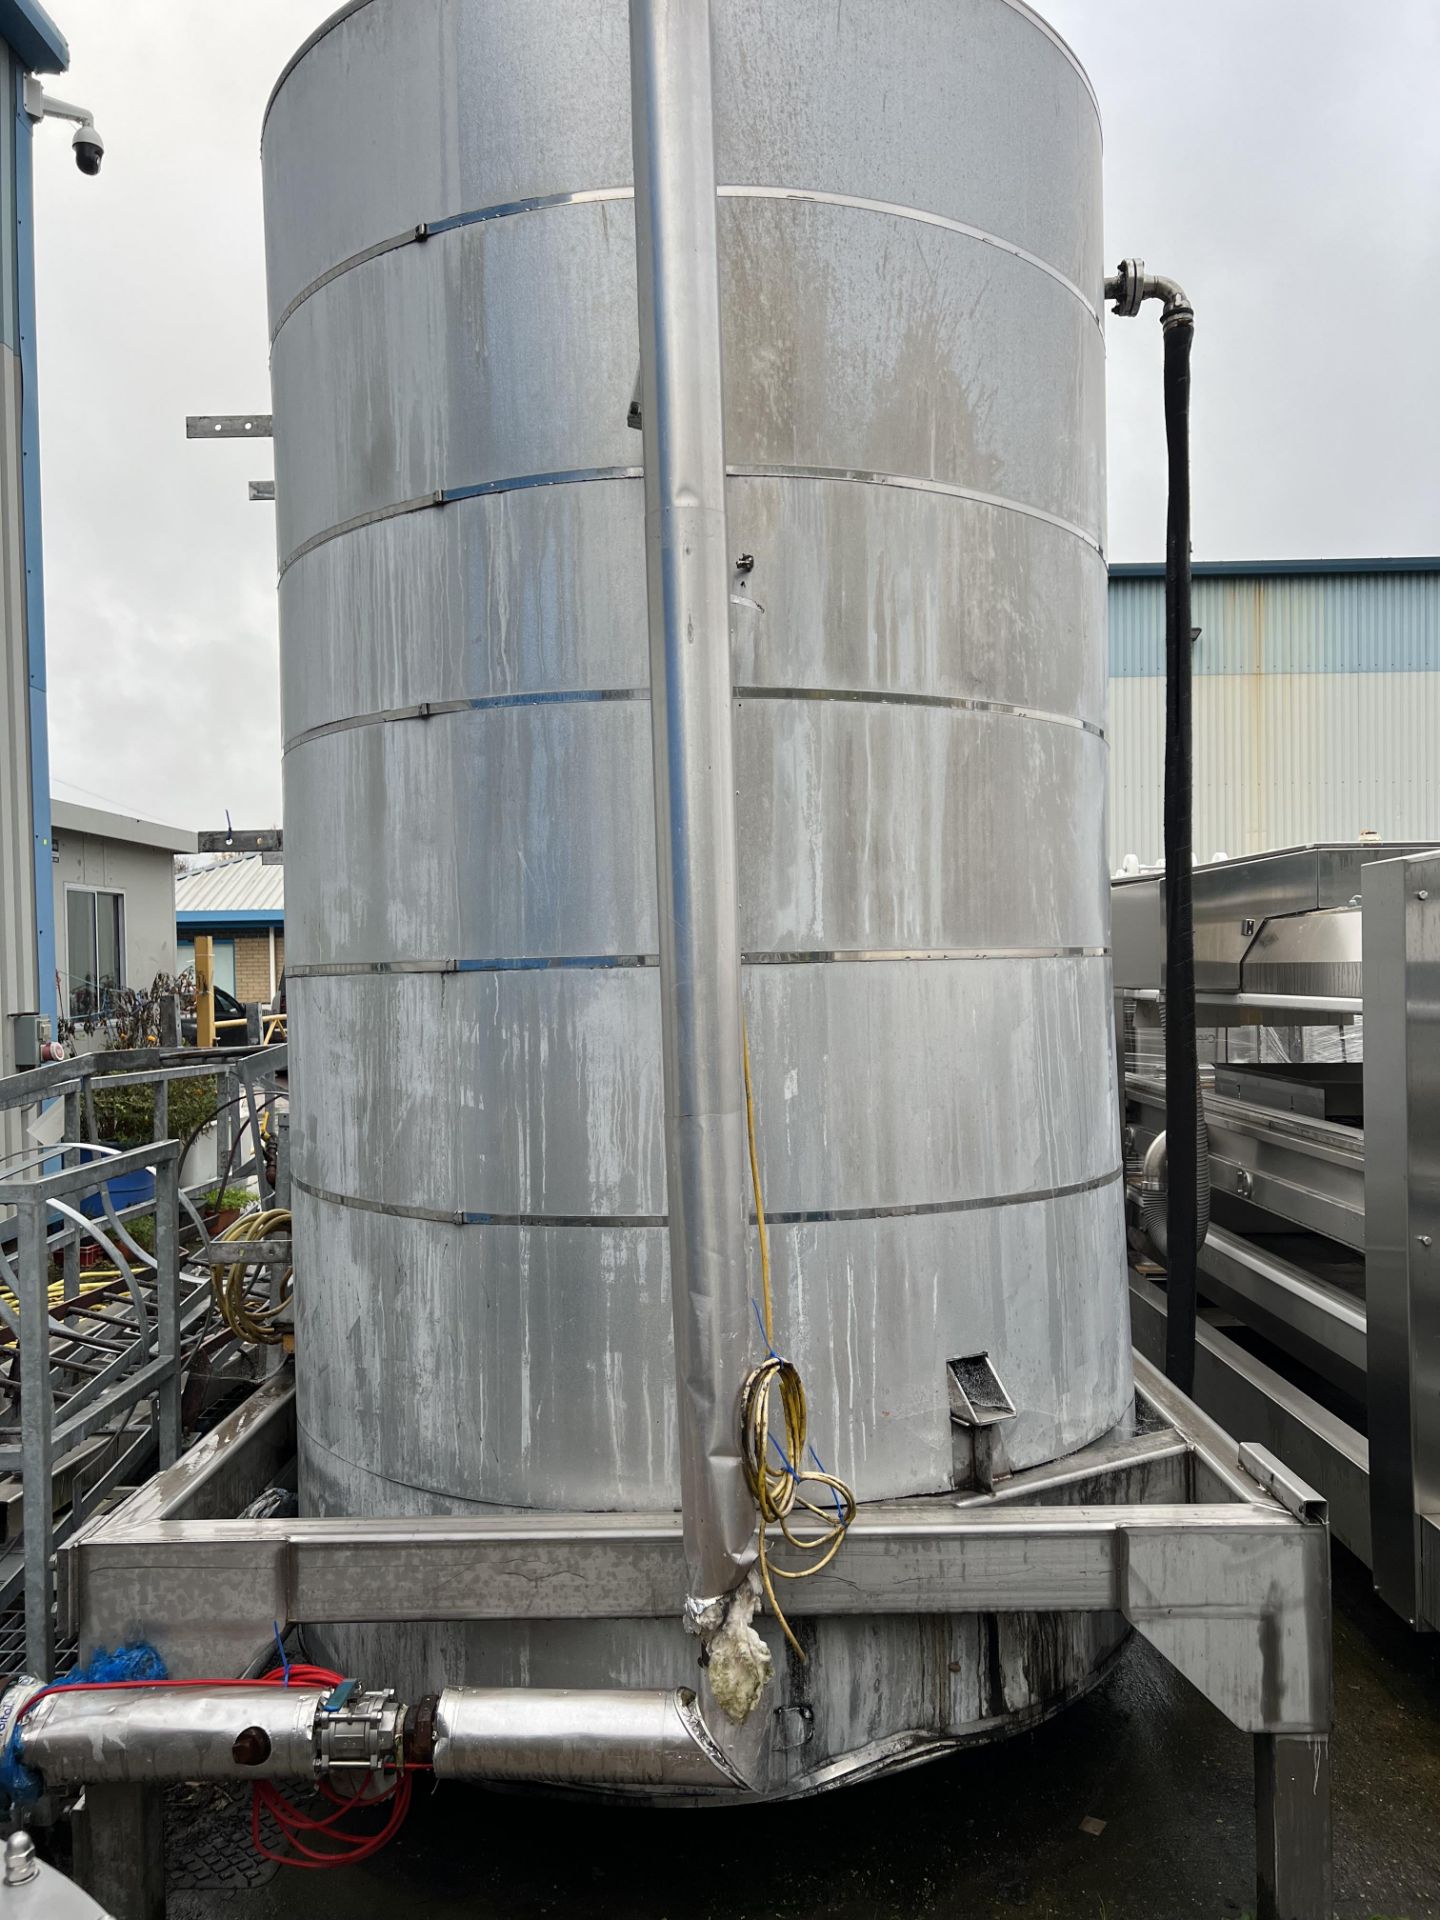 Two Stainless Steel Insulated Tanks, mounted on gantry (been used for storing cooking oil), code. - Image 2 of 4